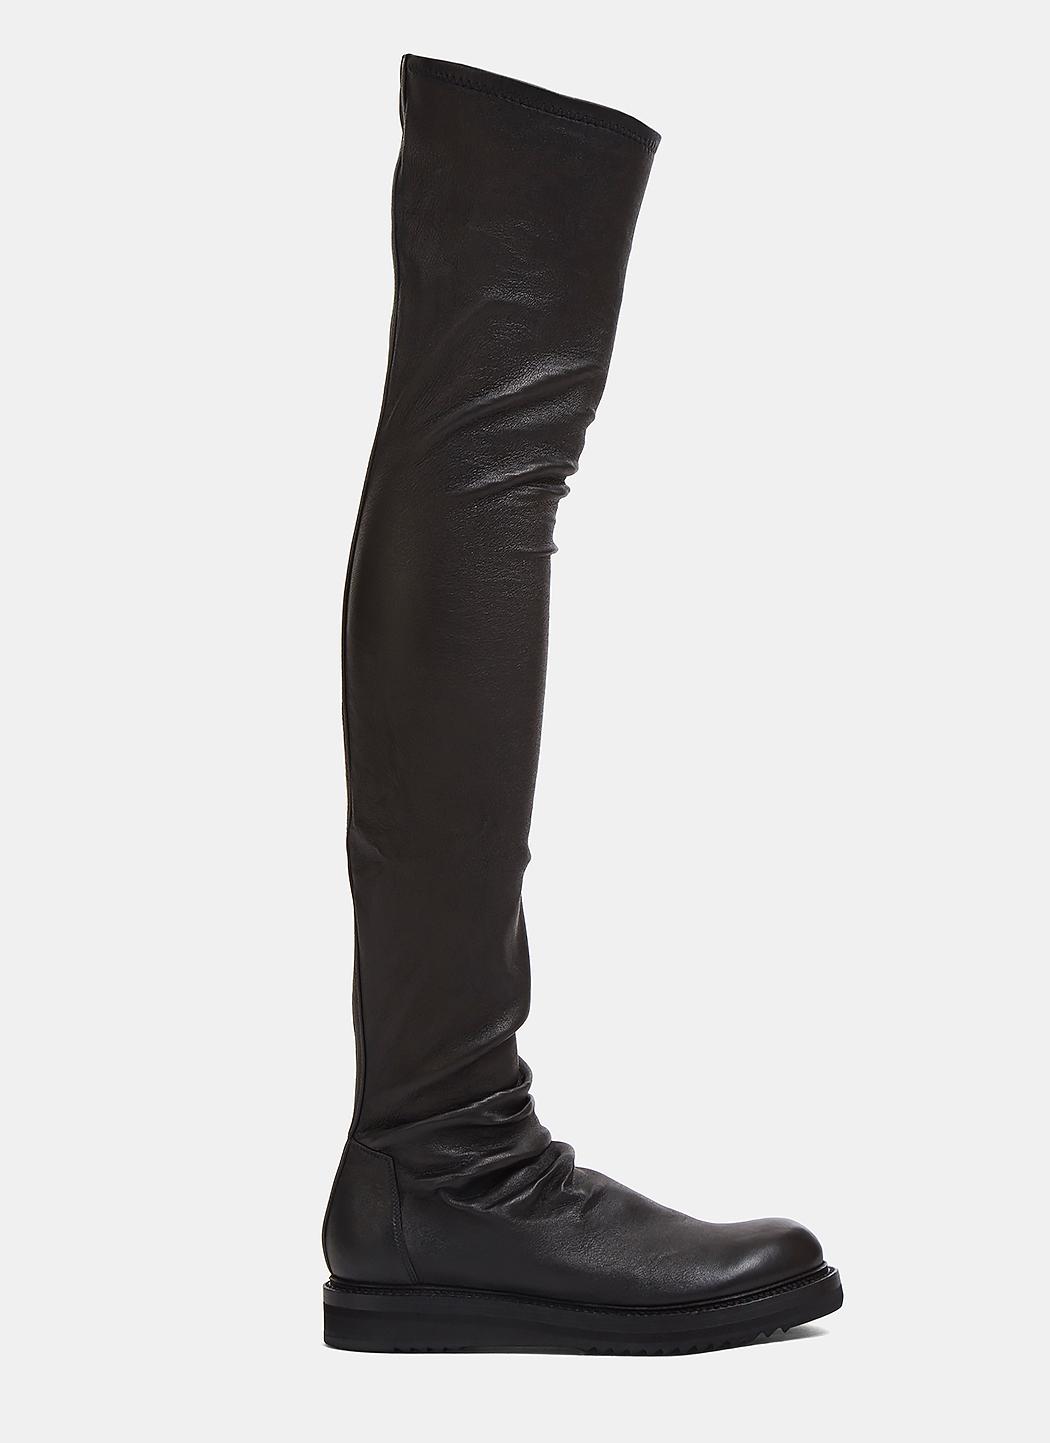 Lyst - Rick Owens Creeper Thigh-high Leather Boots In Black in Black ...